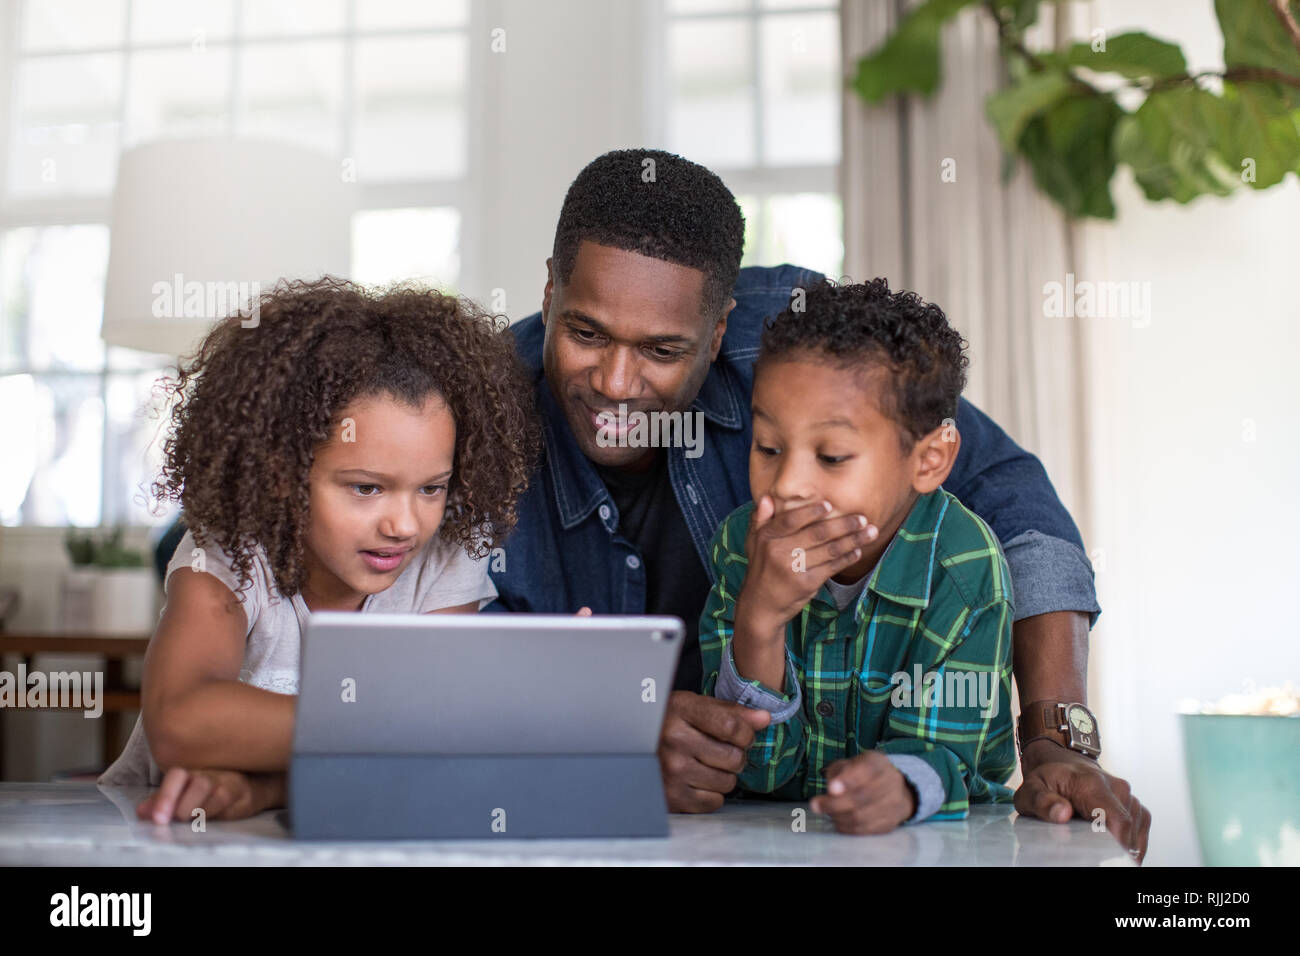 African American family using digital tablet together Stock Photo